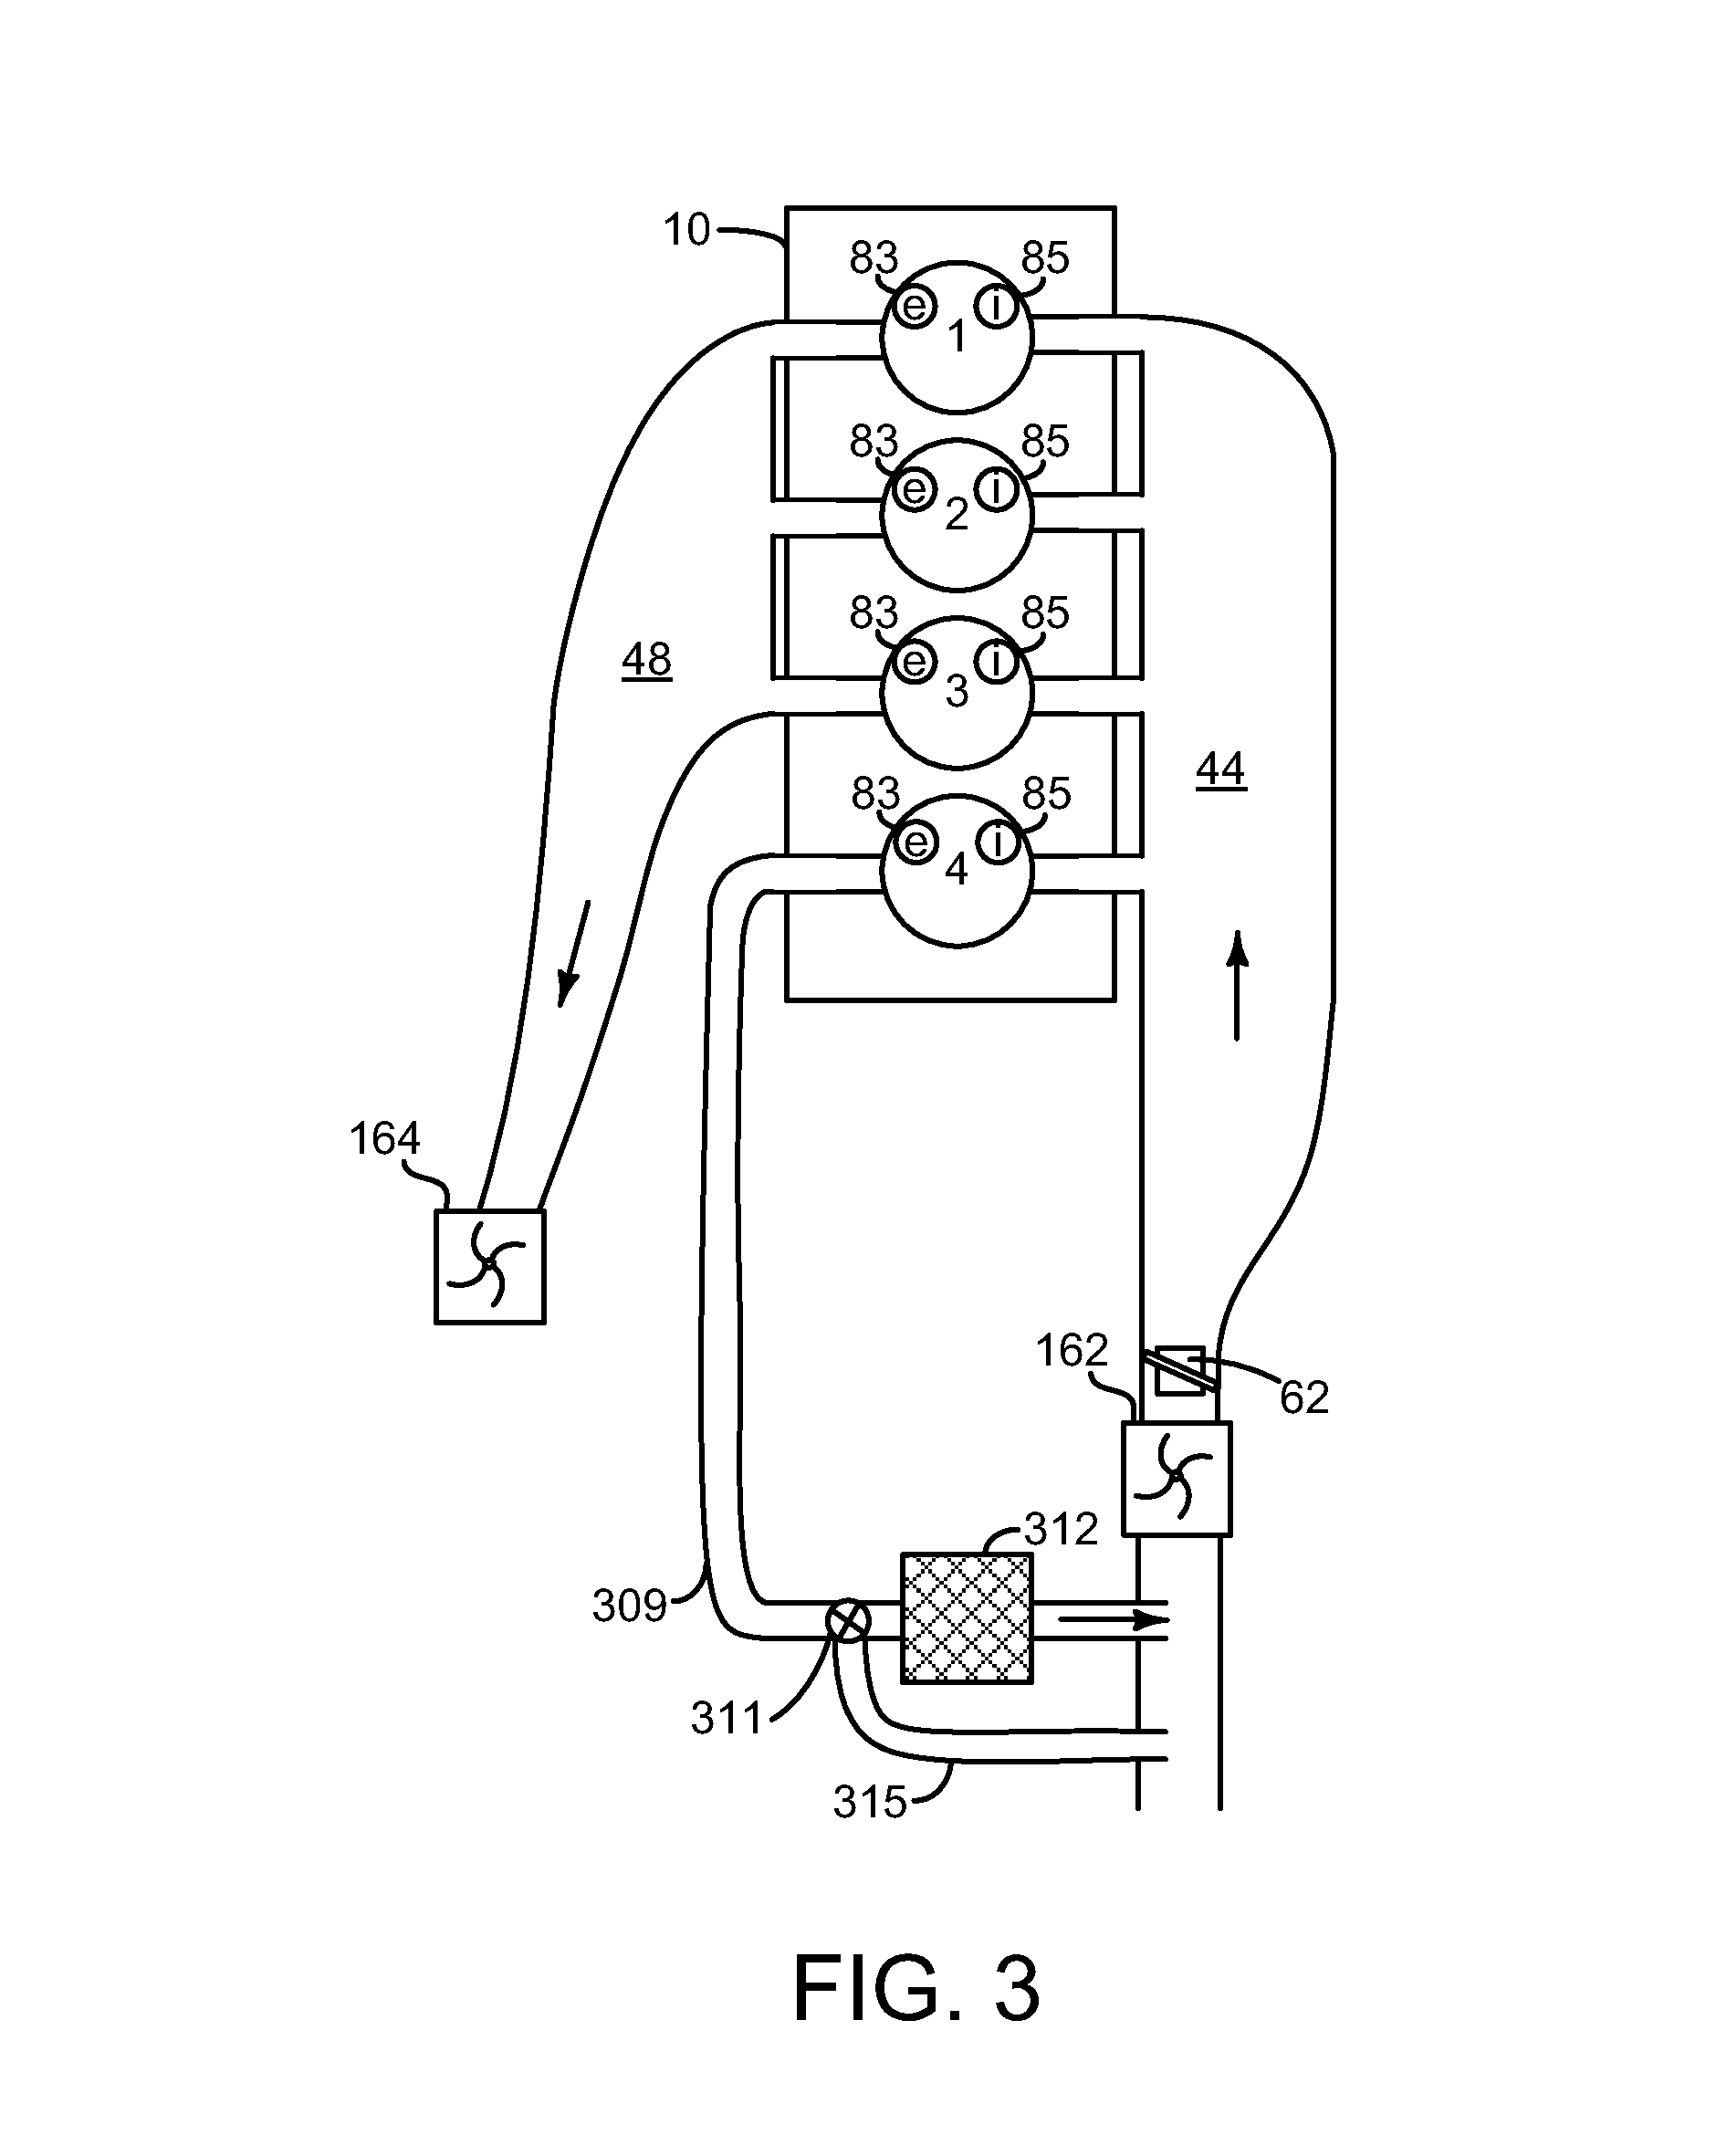 Systems and methods for dedicated egr cylinder exhaust gas temperature control